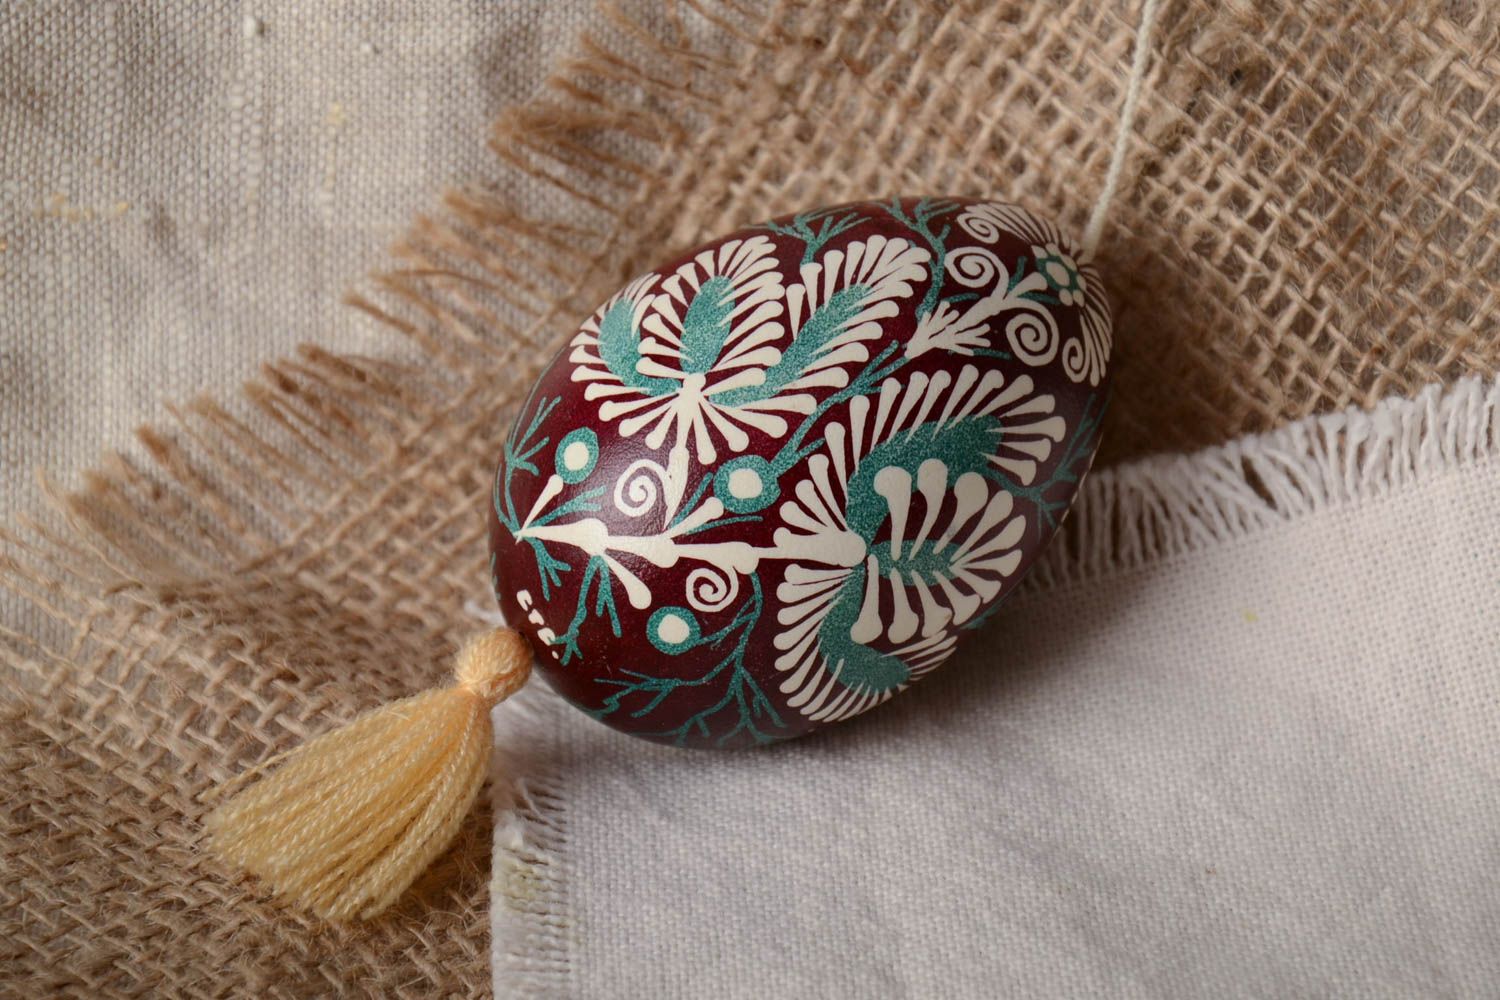 Handmade decorative Easter egg pysanka painted with Lemkiv floral ornaments photo 1